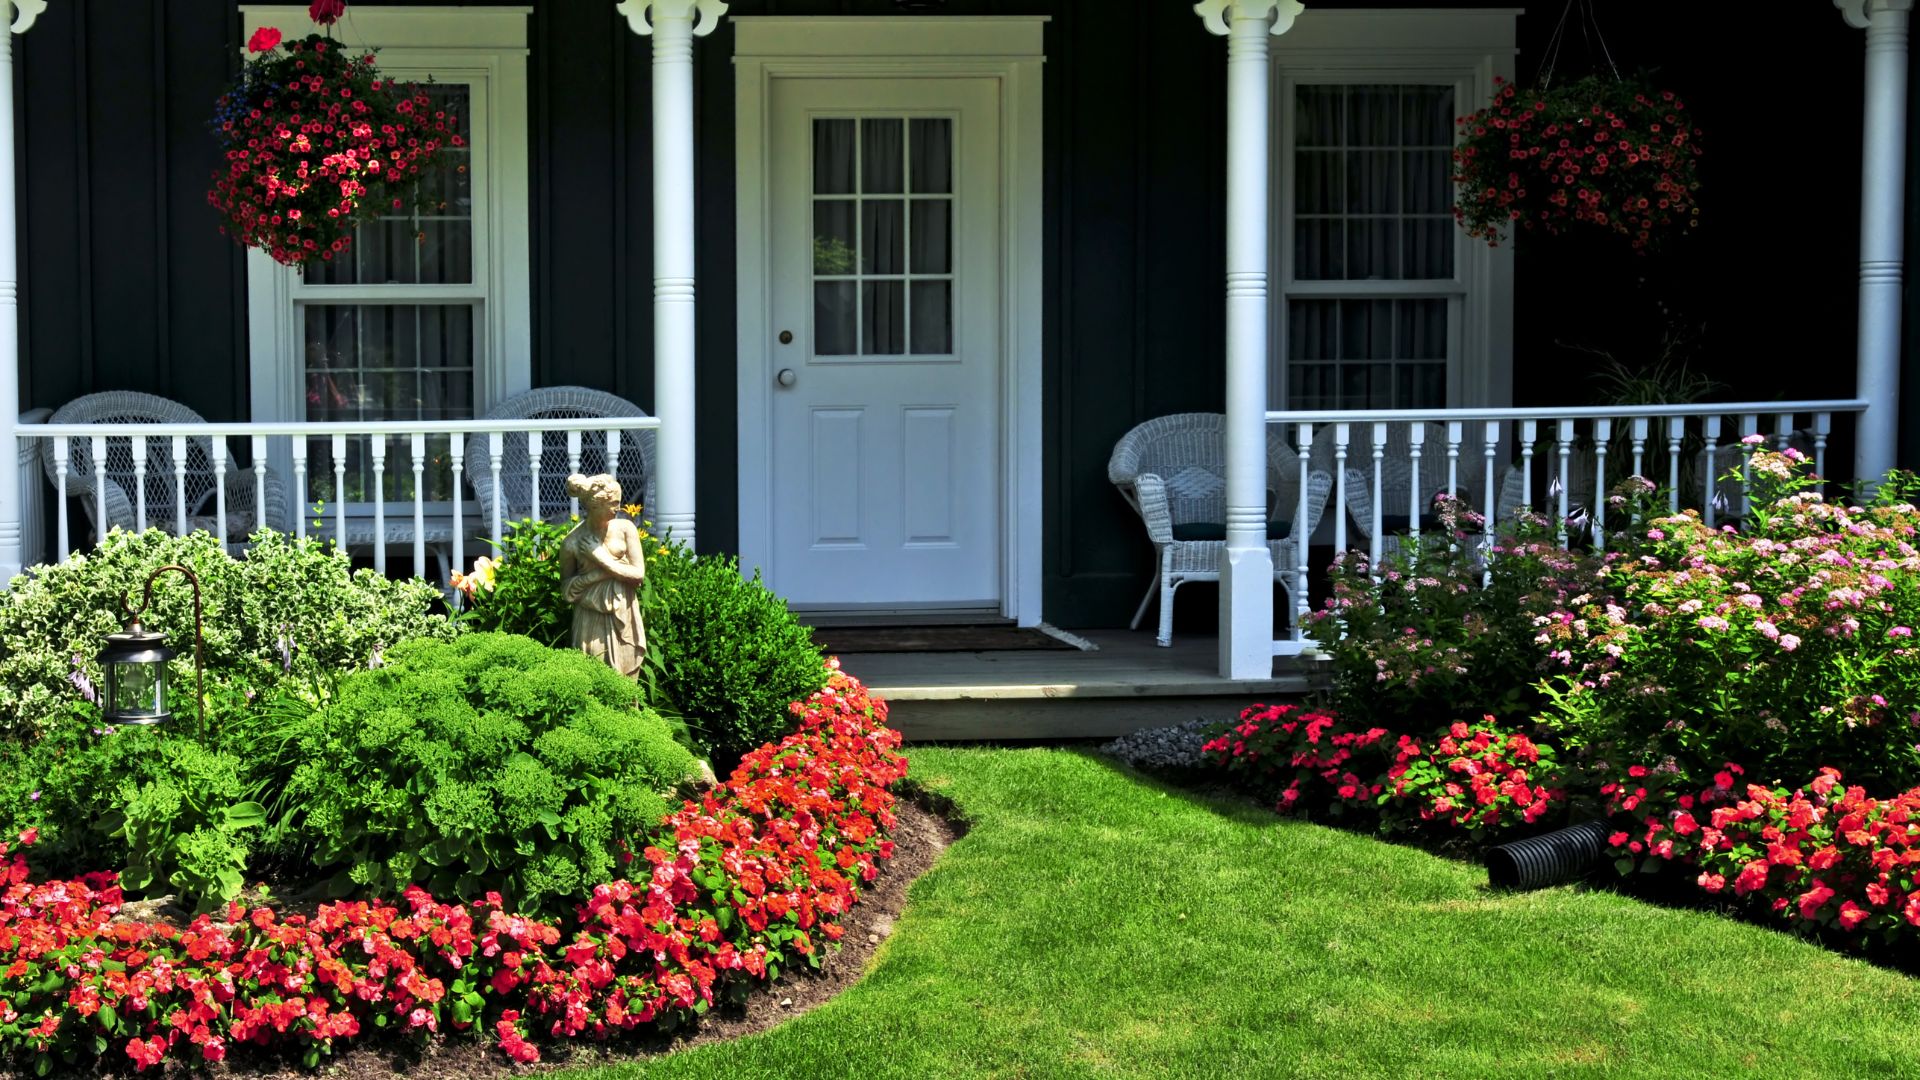 Your front yard landscaping is one of the first things visitors notice when arriving at your home